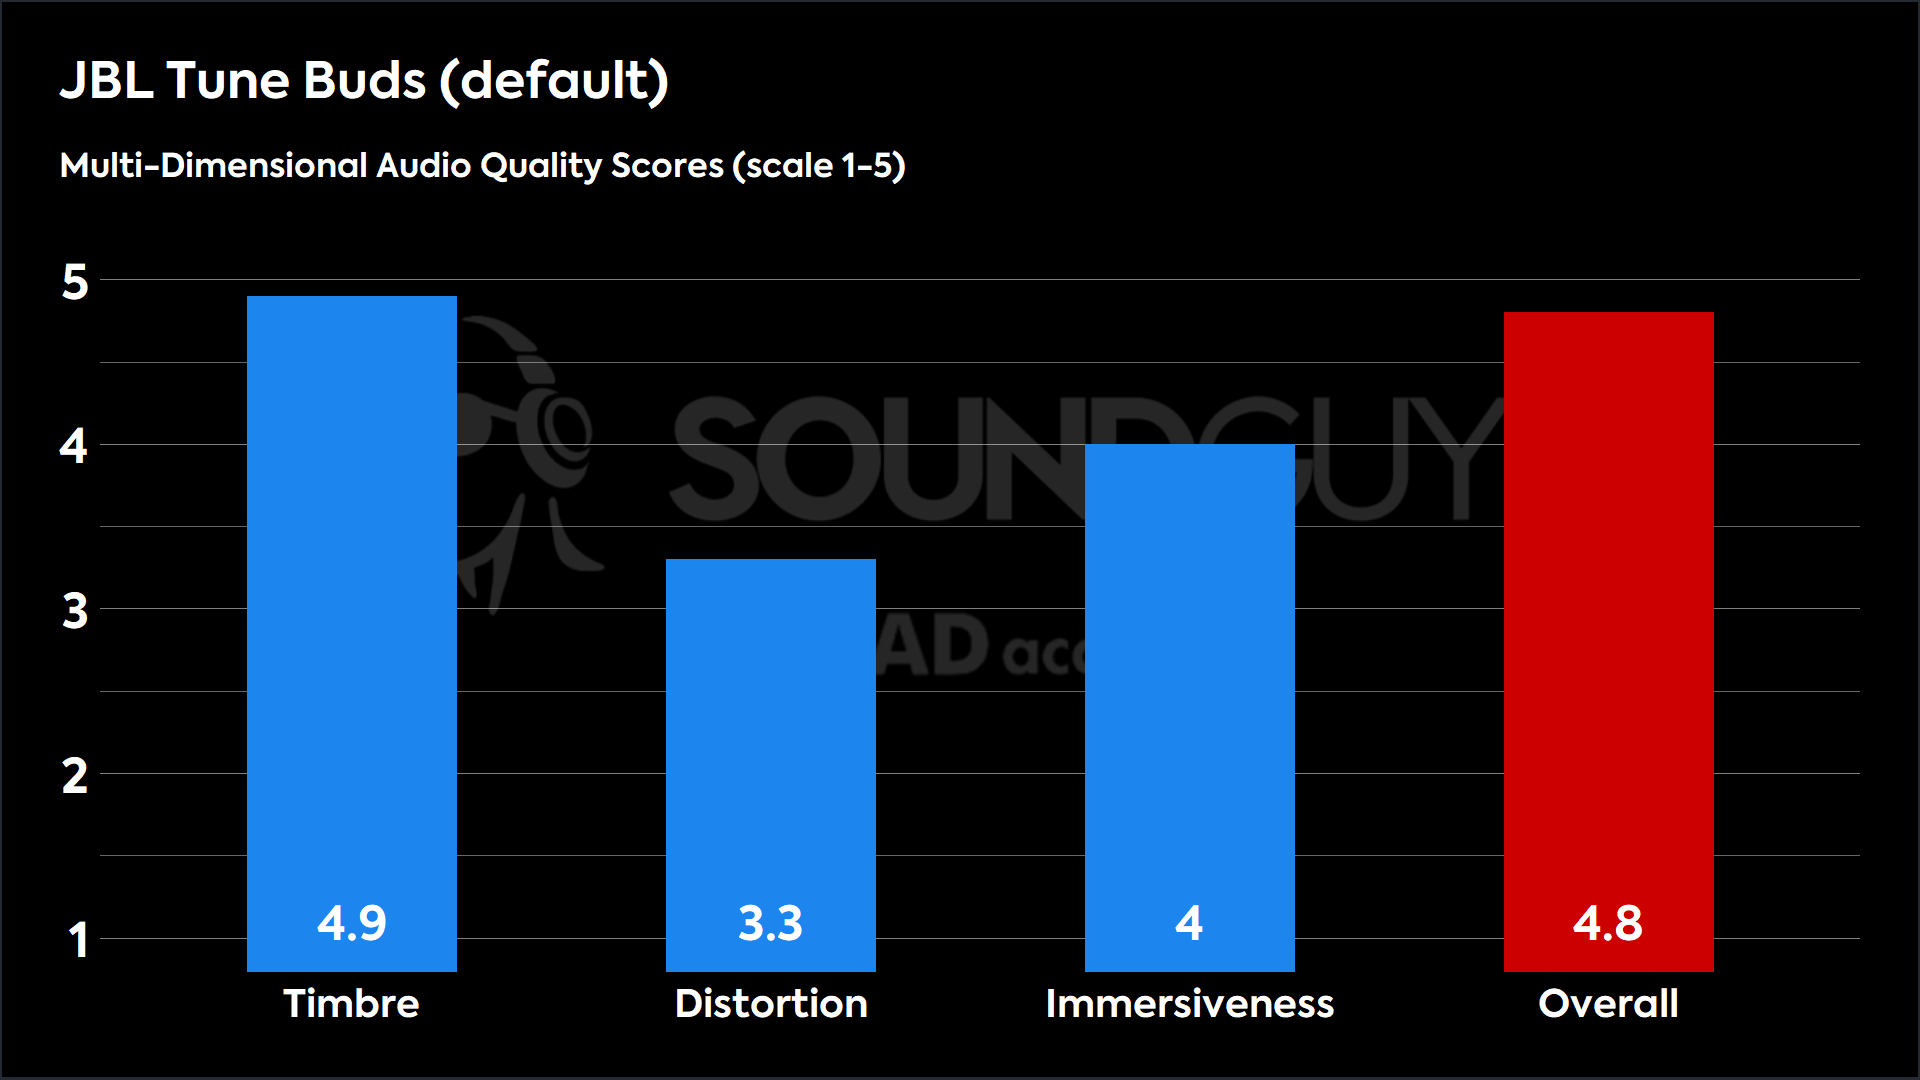 This chart shows the MDAQS results for the JBL Tune Buds in default mode. The Timbre score is 4.9, The Distortion score is 3.3, the Immersiveness score is 4, and the Overall Score is 4.8).